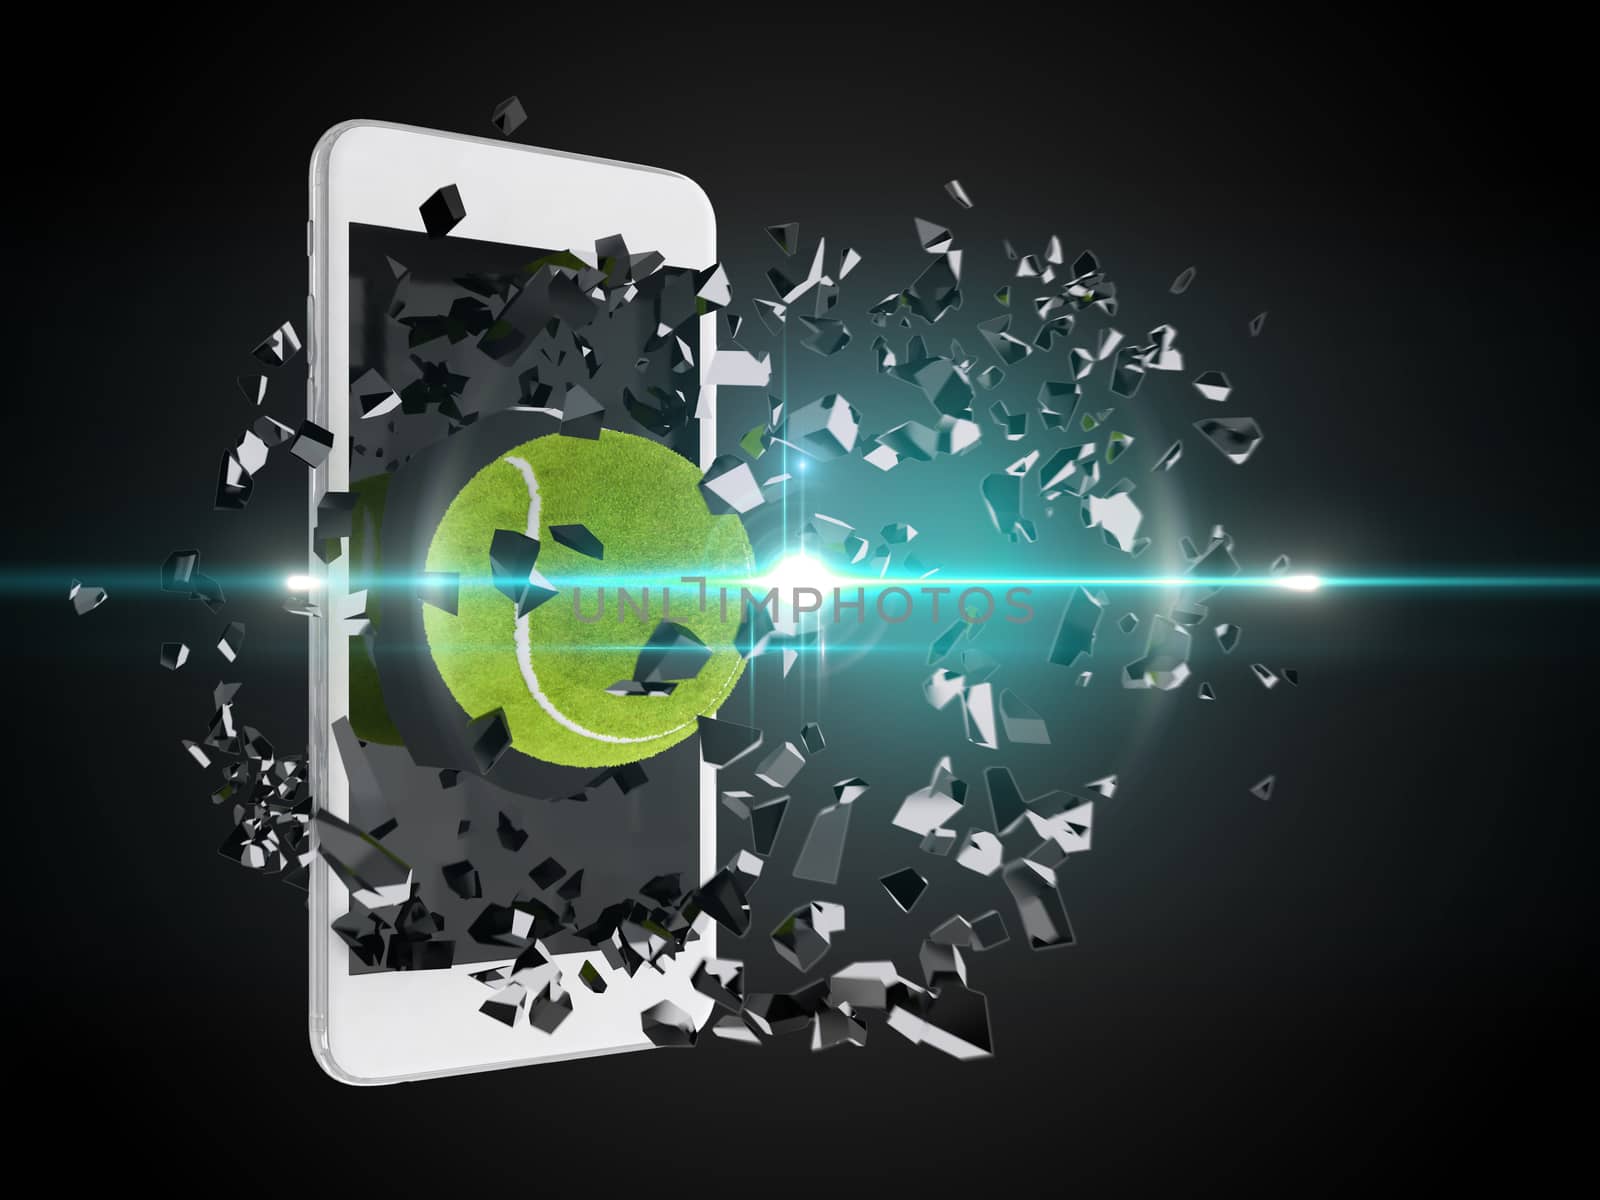 tennis ball burst out of the smartphone, technology background